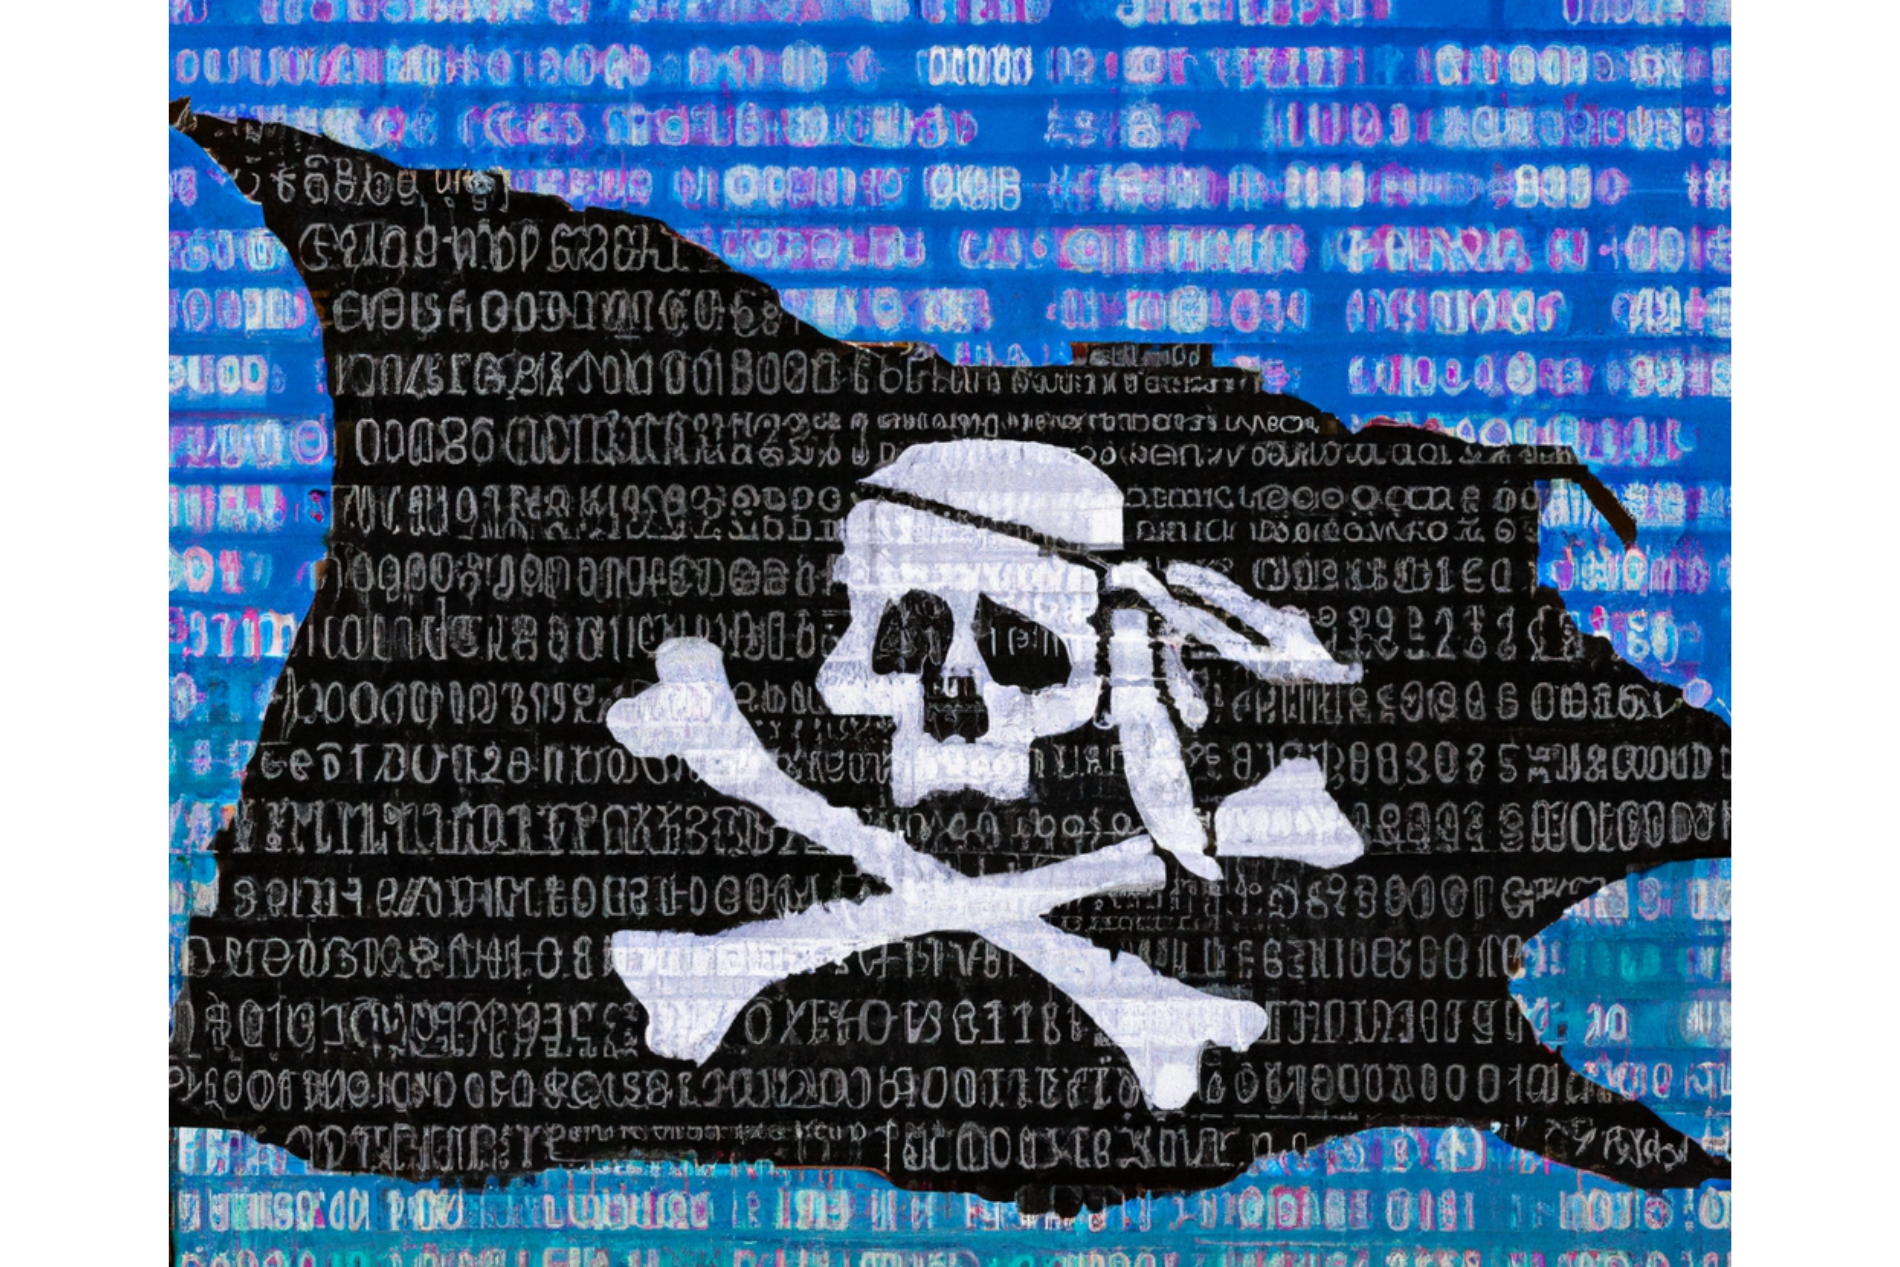 pirate flag over software code